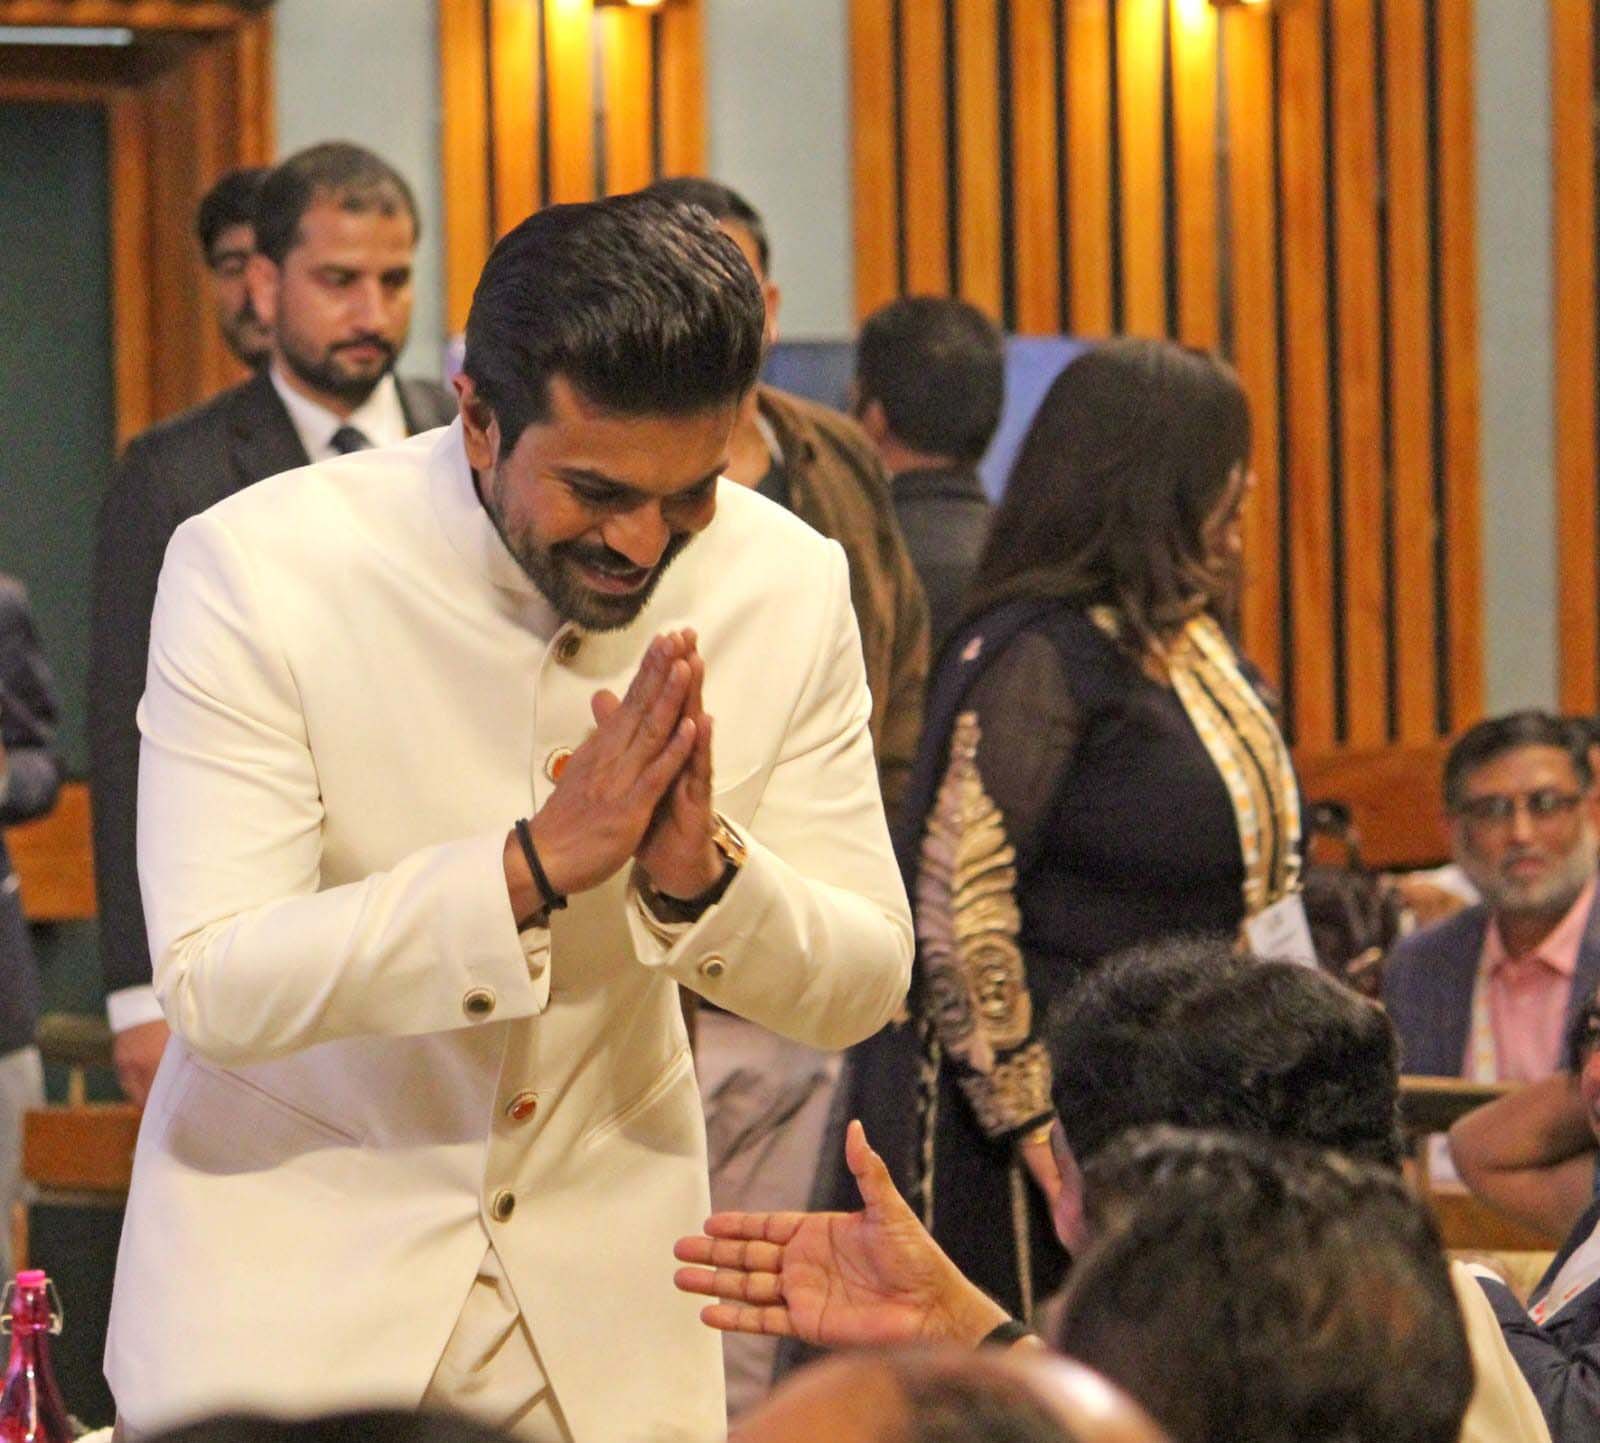 Ram Charan Stuns in Ethnic Attire at G20 Summit in Srinagar; Check out the Pictures